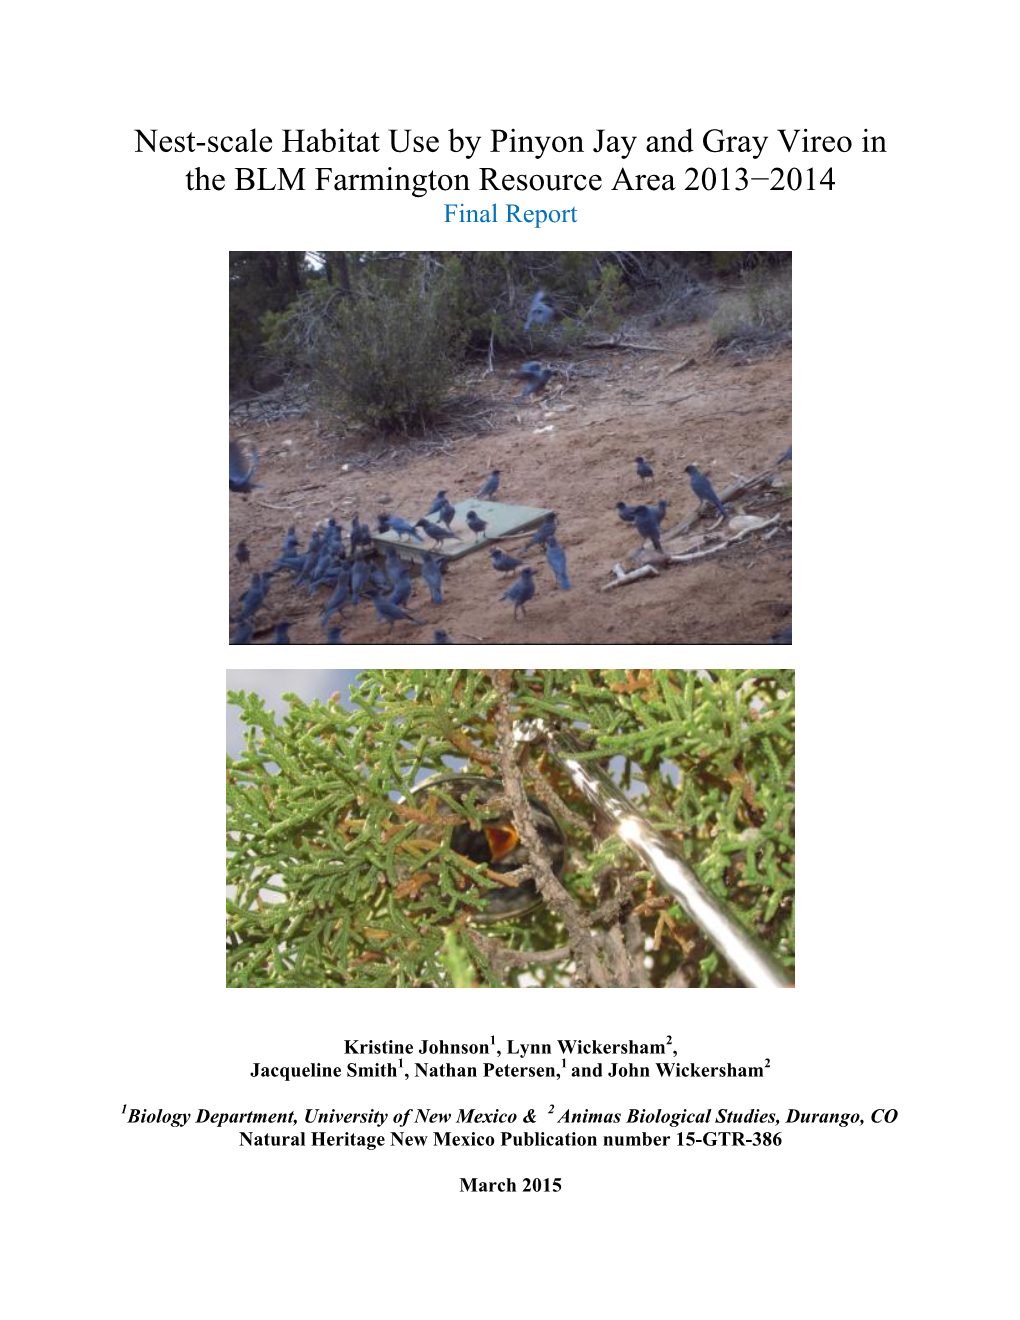 Nest-Scale Habitat Use by Pinyon Jay and Gray Vireo in the BLM Farmington Resource Area 2013−2014 Final Report